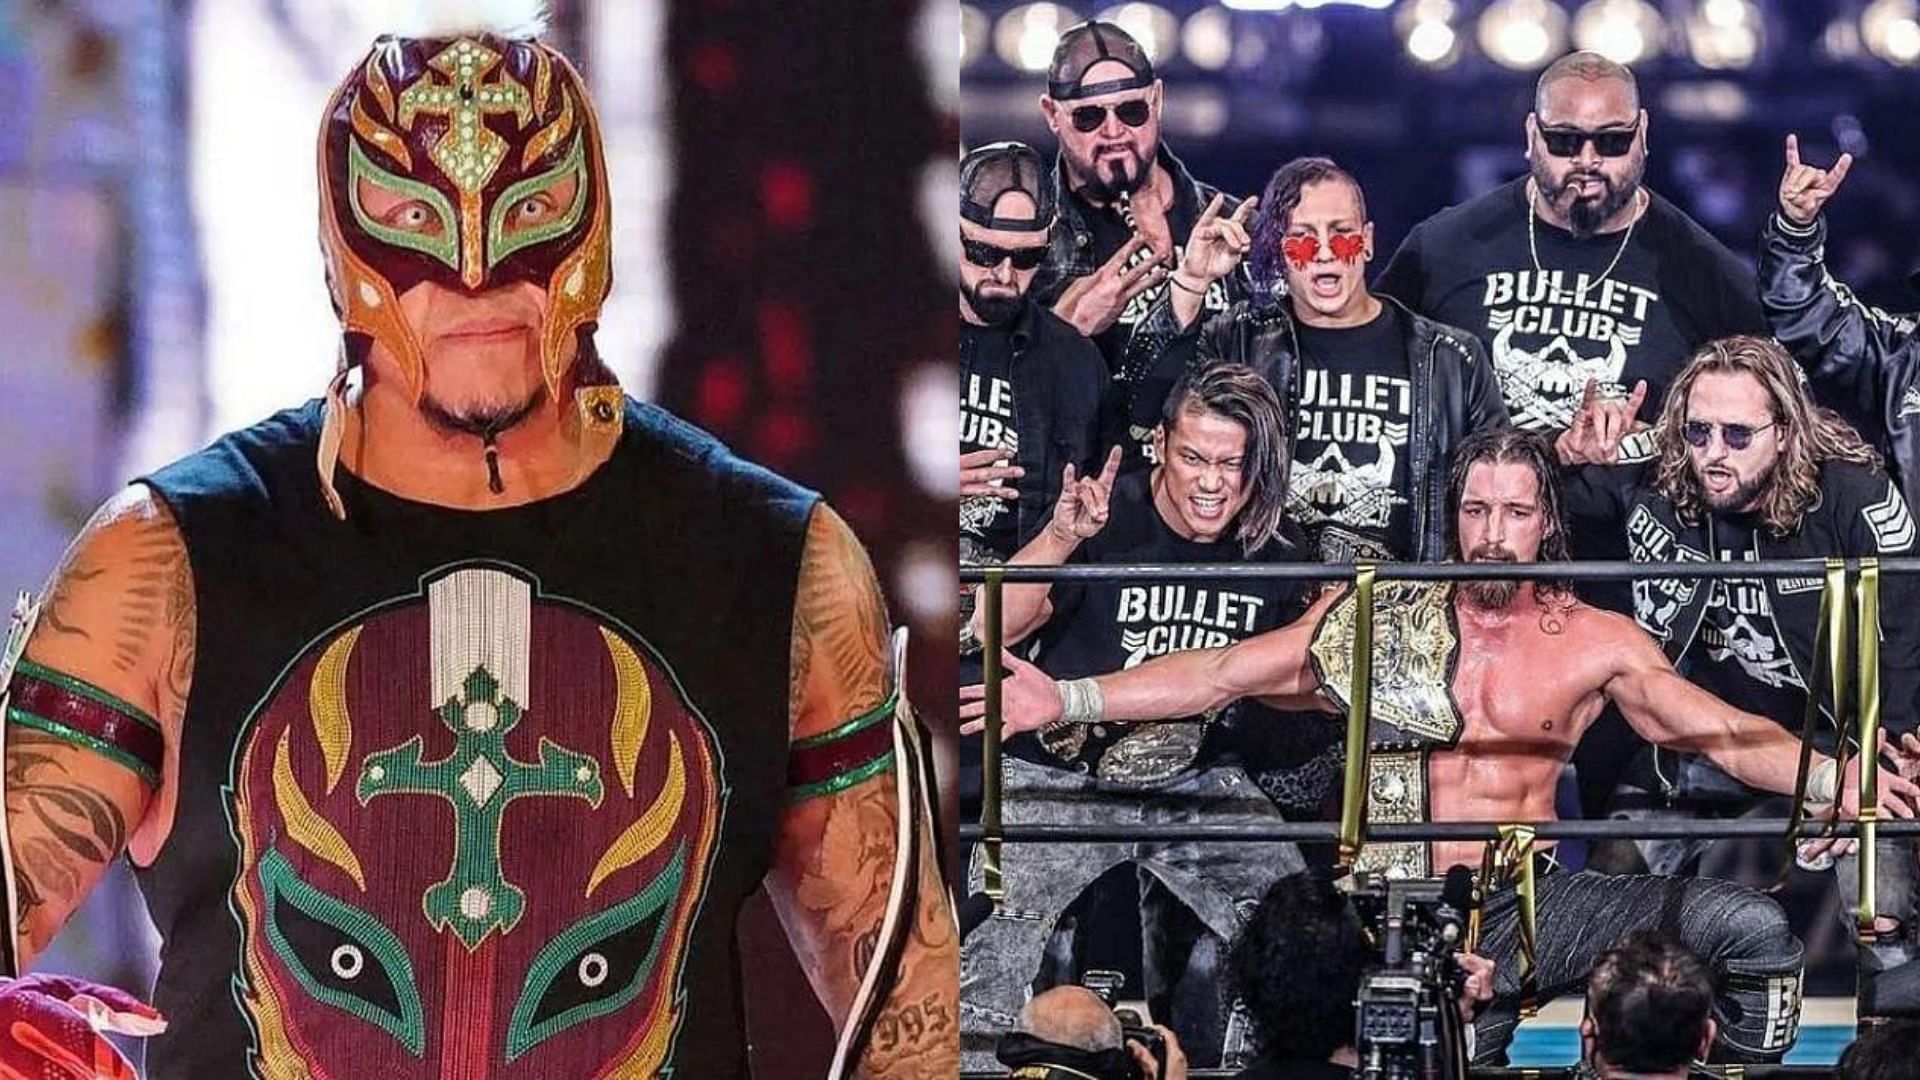 Rey Mysterio was spotted with a Bullet Club member